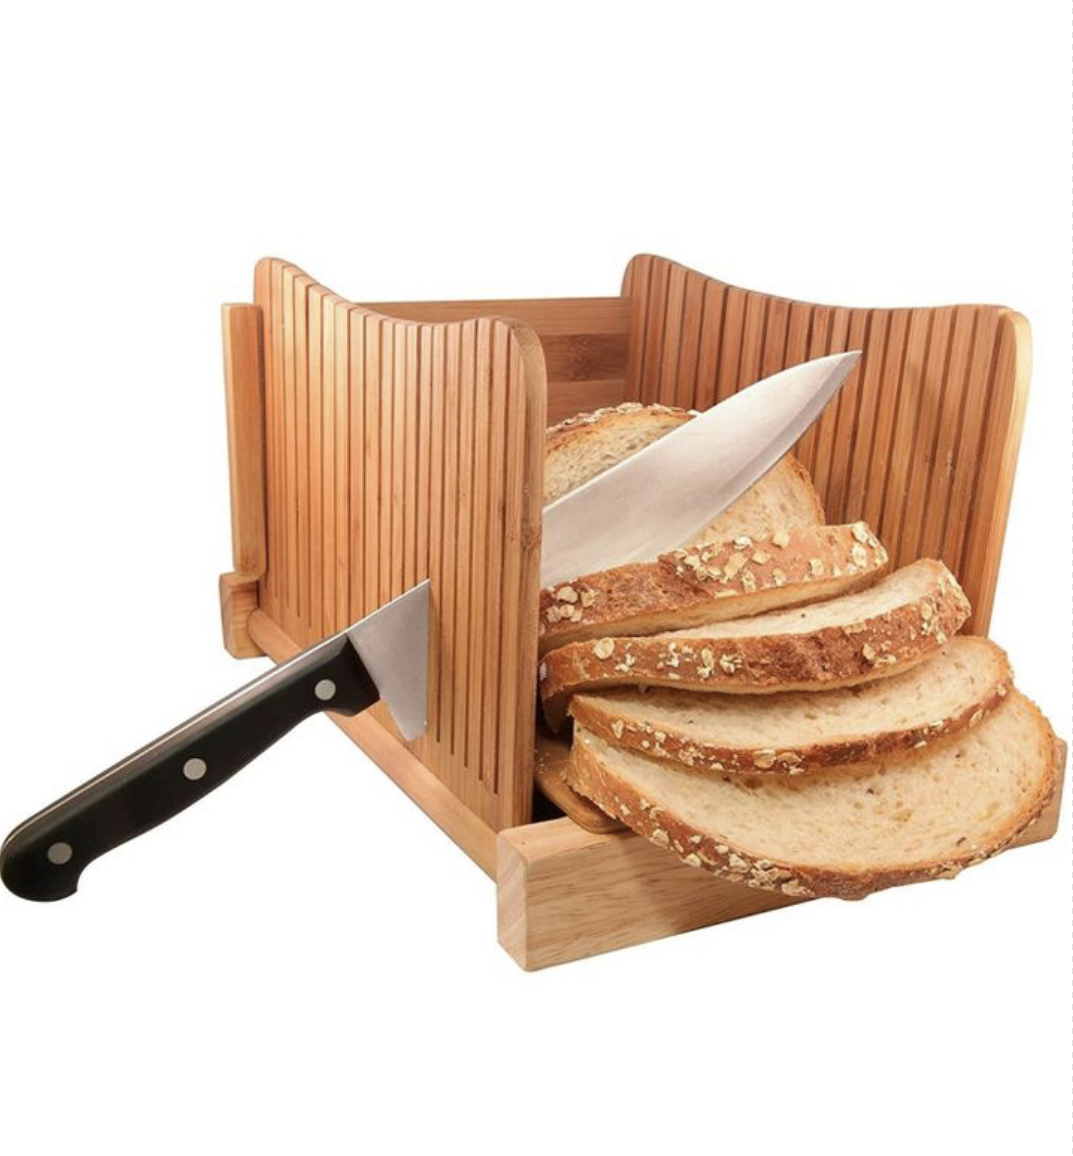 The bamboo wood compact foldable bread slicer